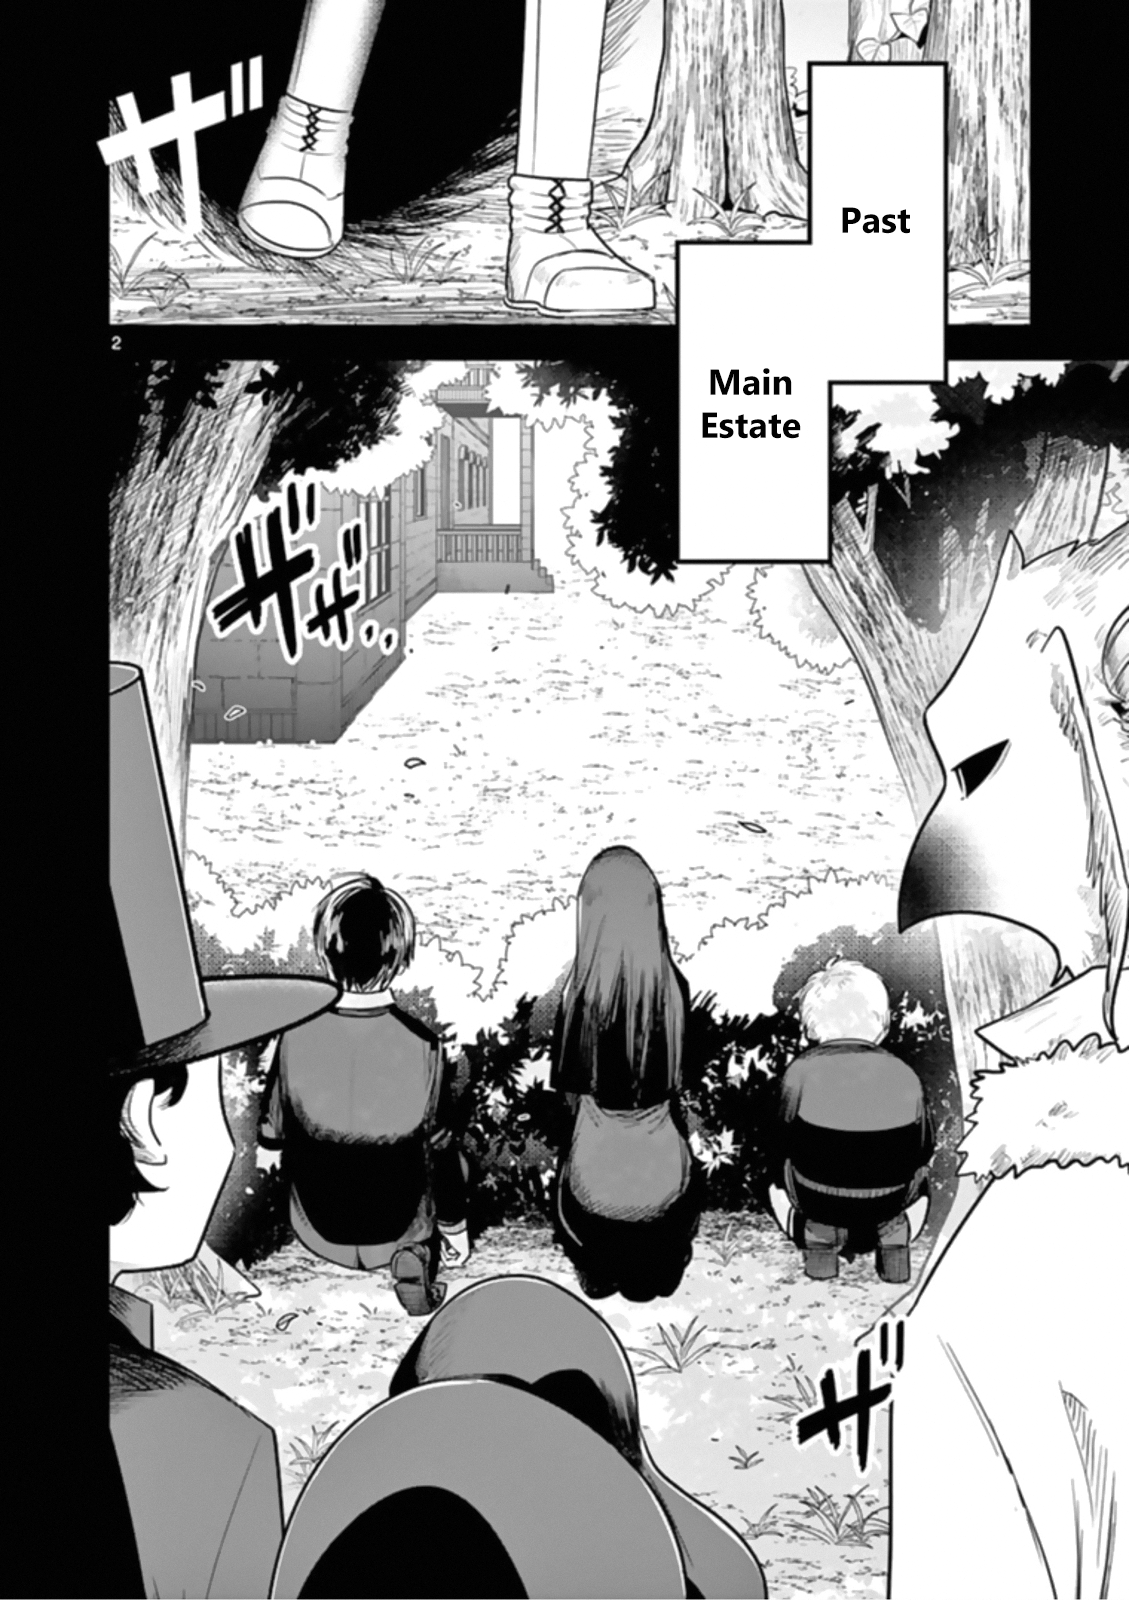 The Duke Of Death And His Black Maid Chapter 193: Past - Main Estate - Picture 2